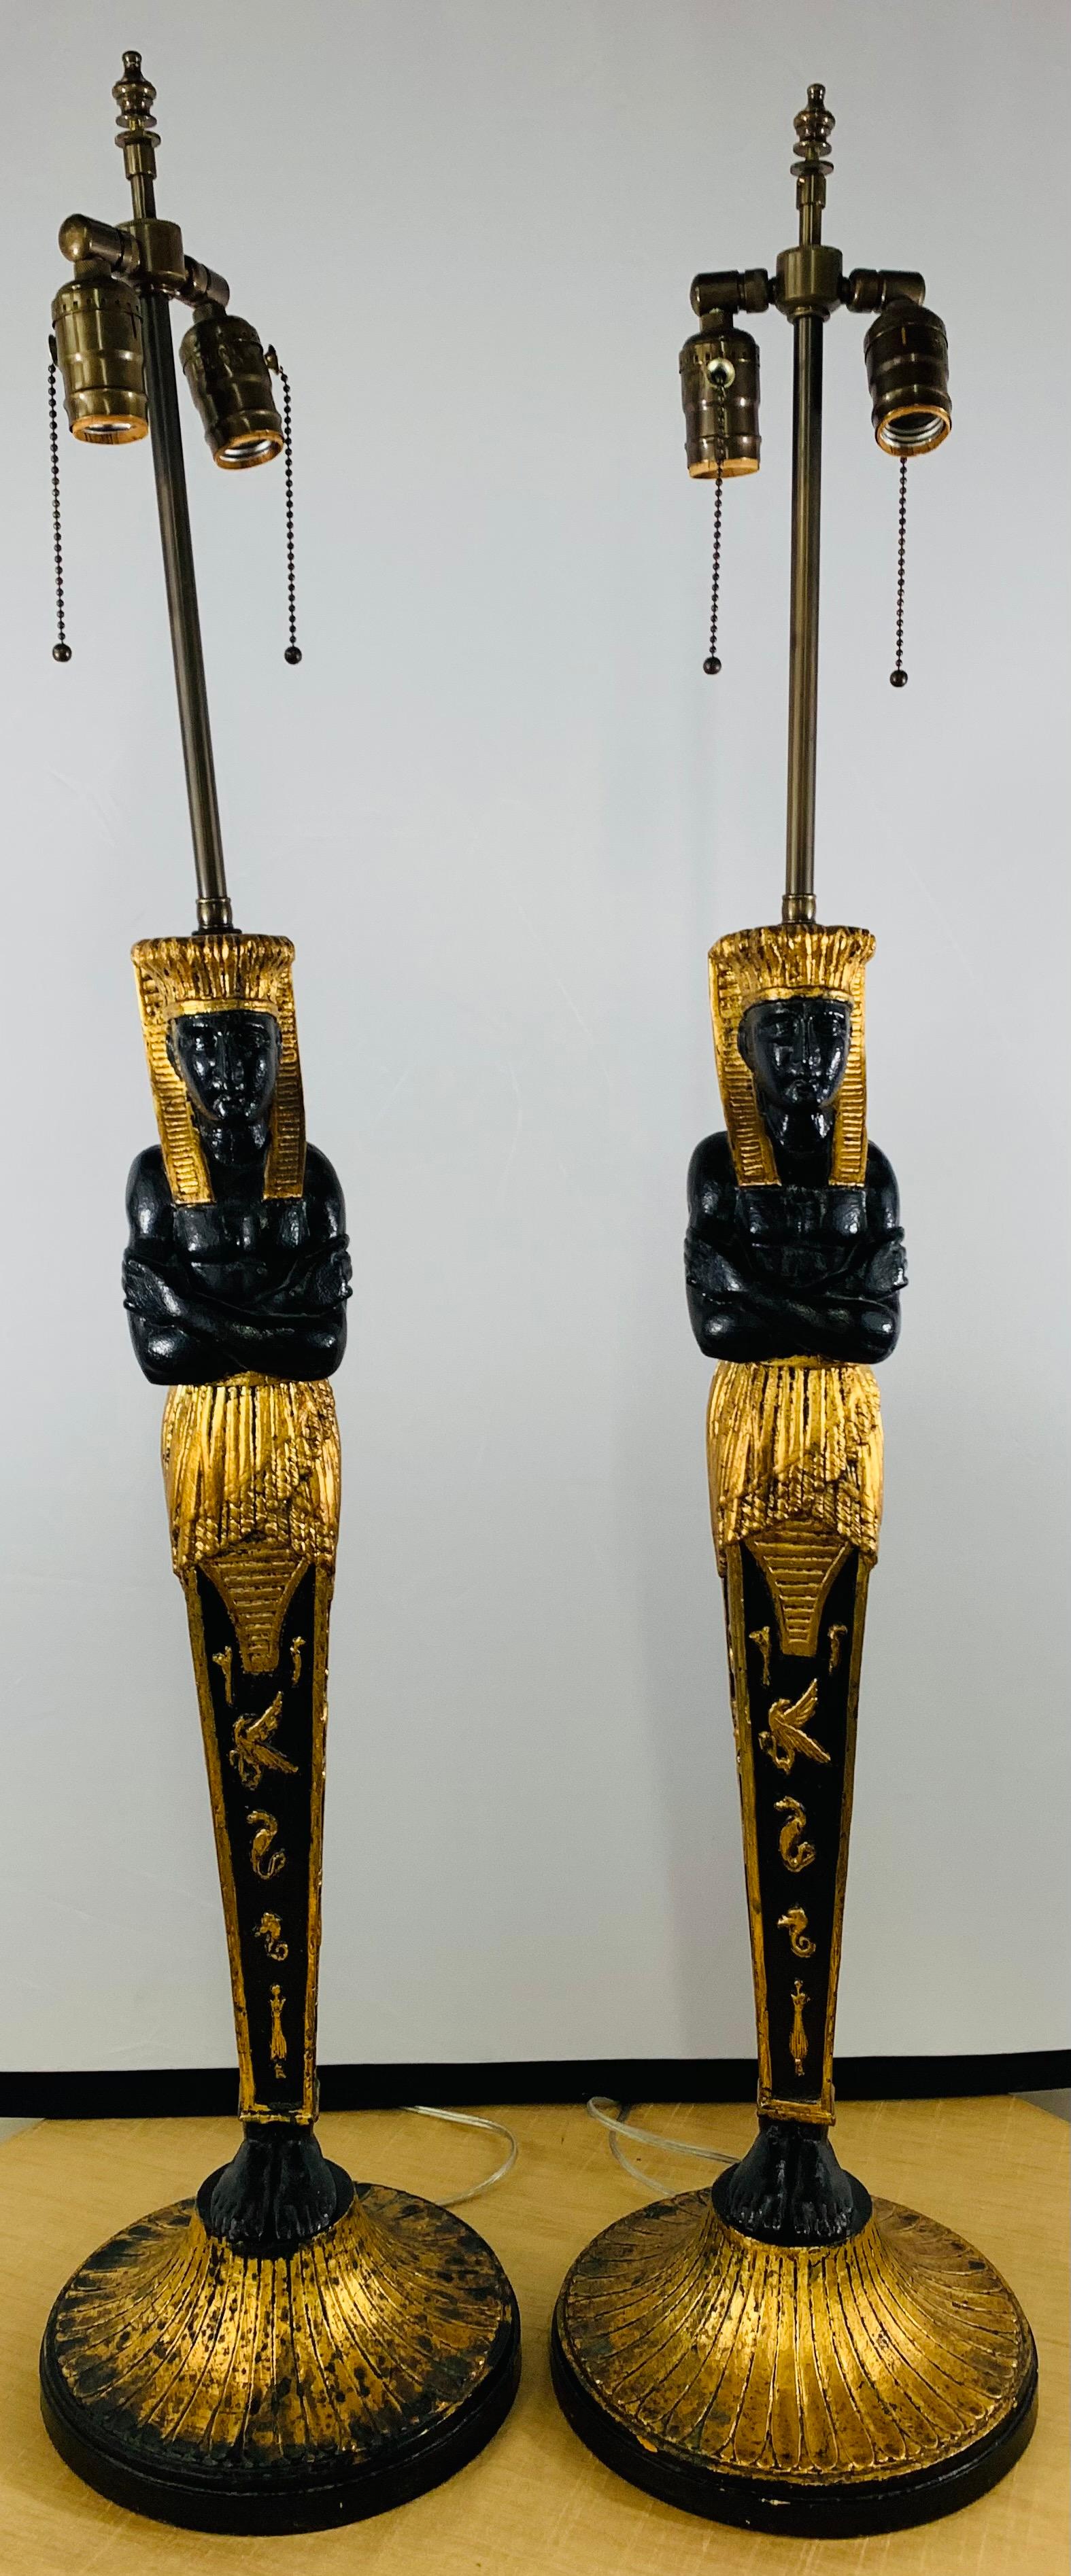 A stunning 1970s pair of ebonized table lamps in the shape of Pharaoh finely hand carved and gild decorated. The black and gold Pharaoh lamps features amazing details and Amarna letters ( Ancient Egyptian letters). Each lamp has two standard bulbs